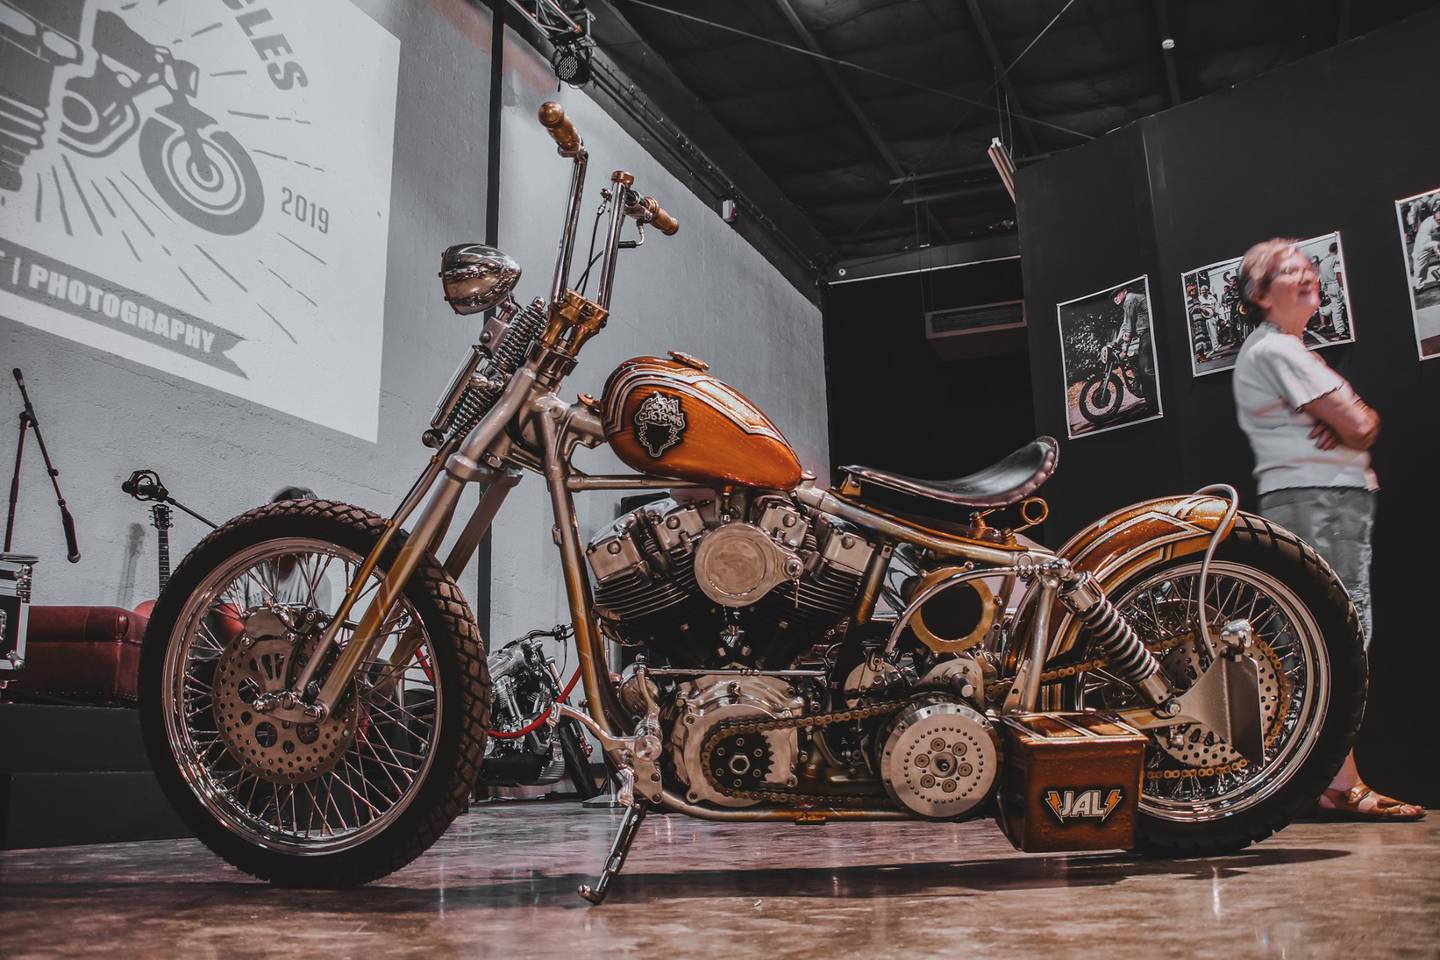 An award-winning Shovelhead built in Dubai by Lycan Customs pictured at last year’s event. Photo: Cafe Racers Middle East